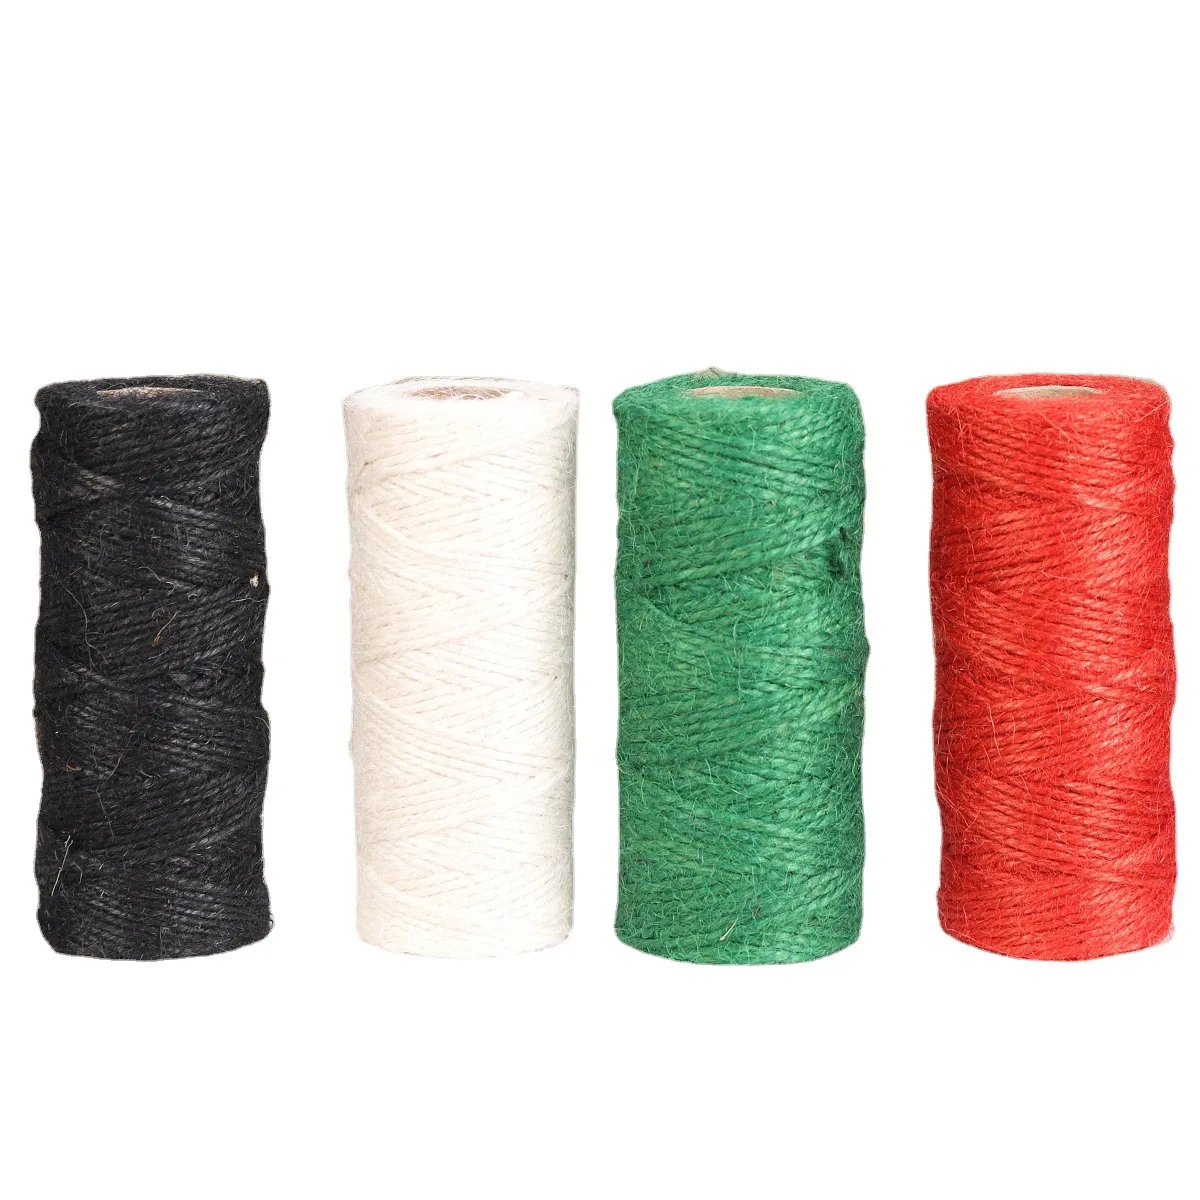 1.5mm 50M Red Green Burlap Jute Cords Hemp Rope String Gift Packing Wedding Party Christmas Festival Decoration Handcraft DIY images - 6